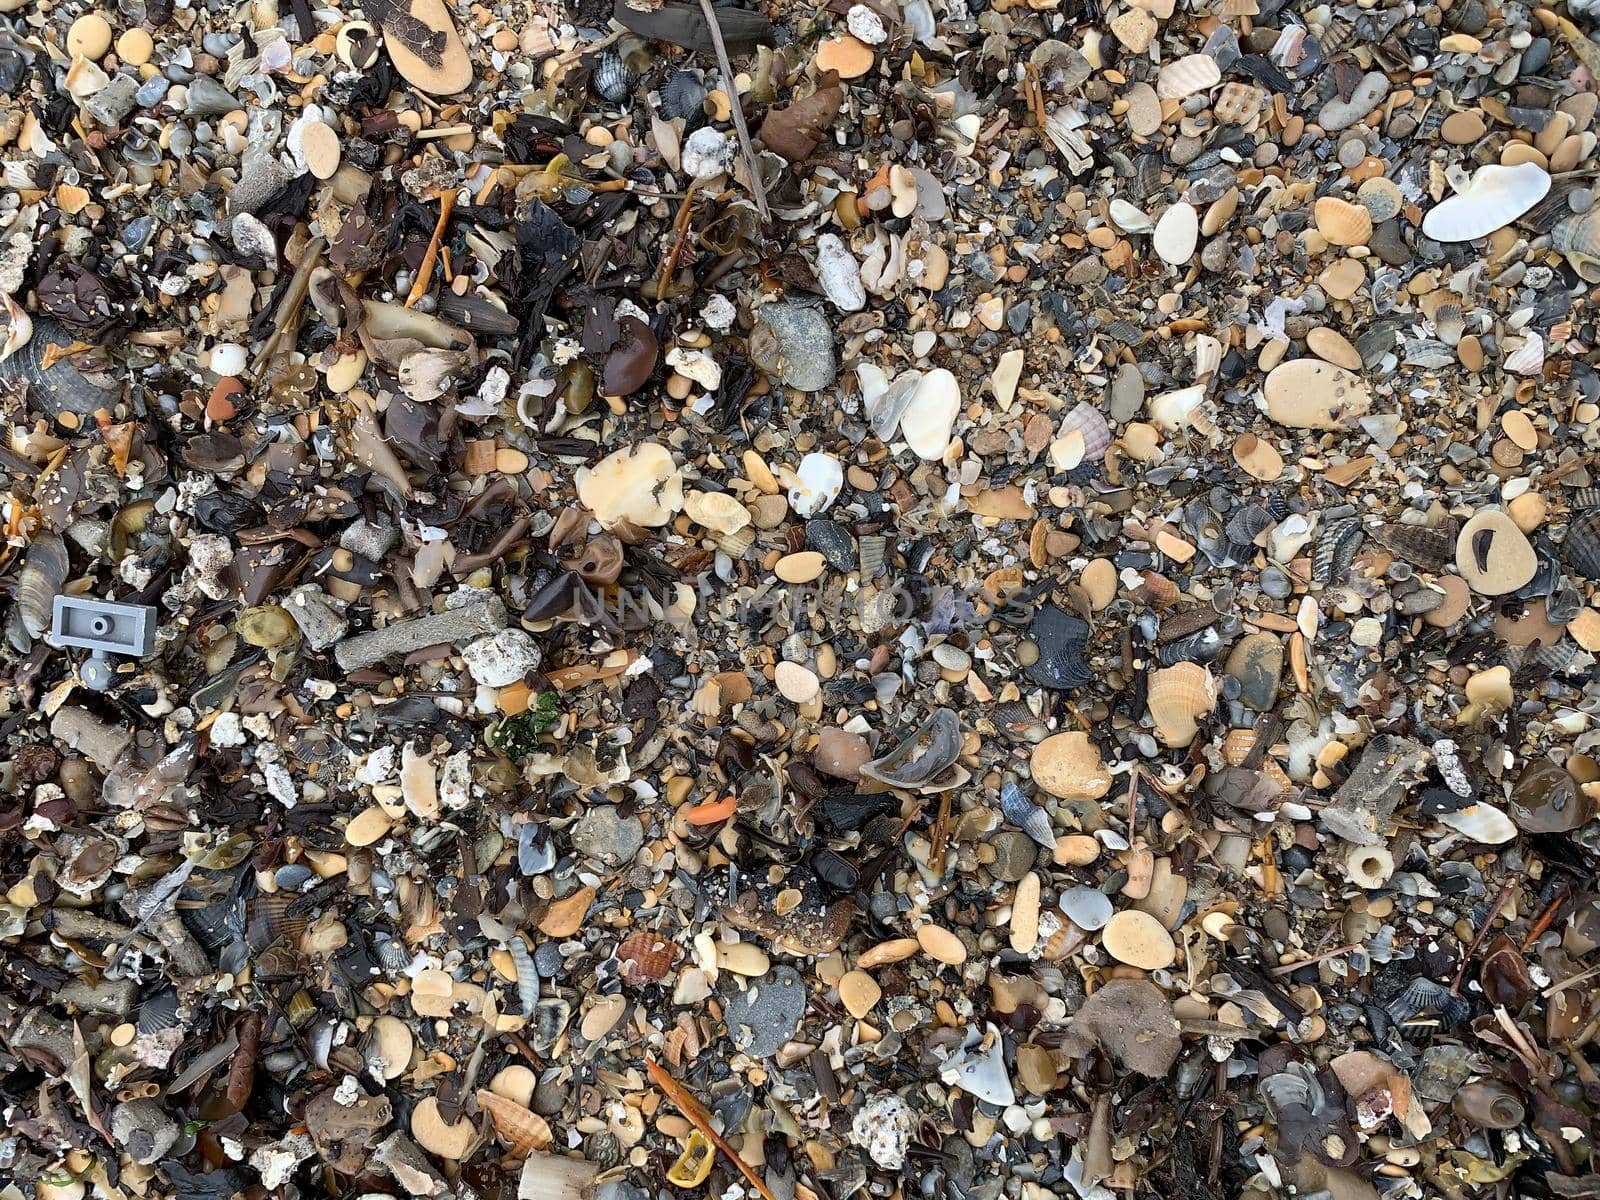 garbage after the surf on the seashore shells pebbles human waste. environmental problems